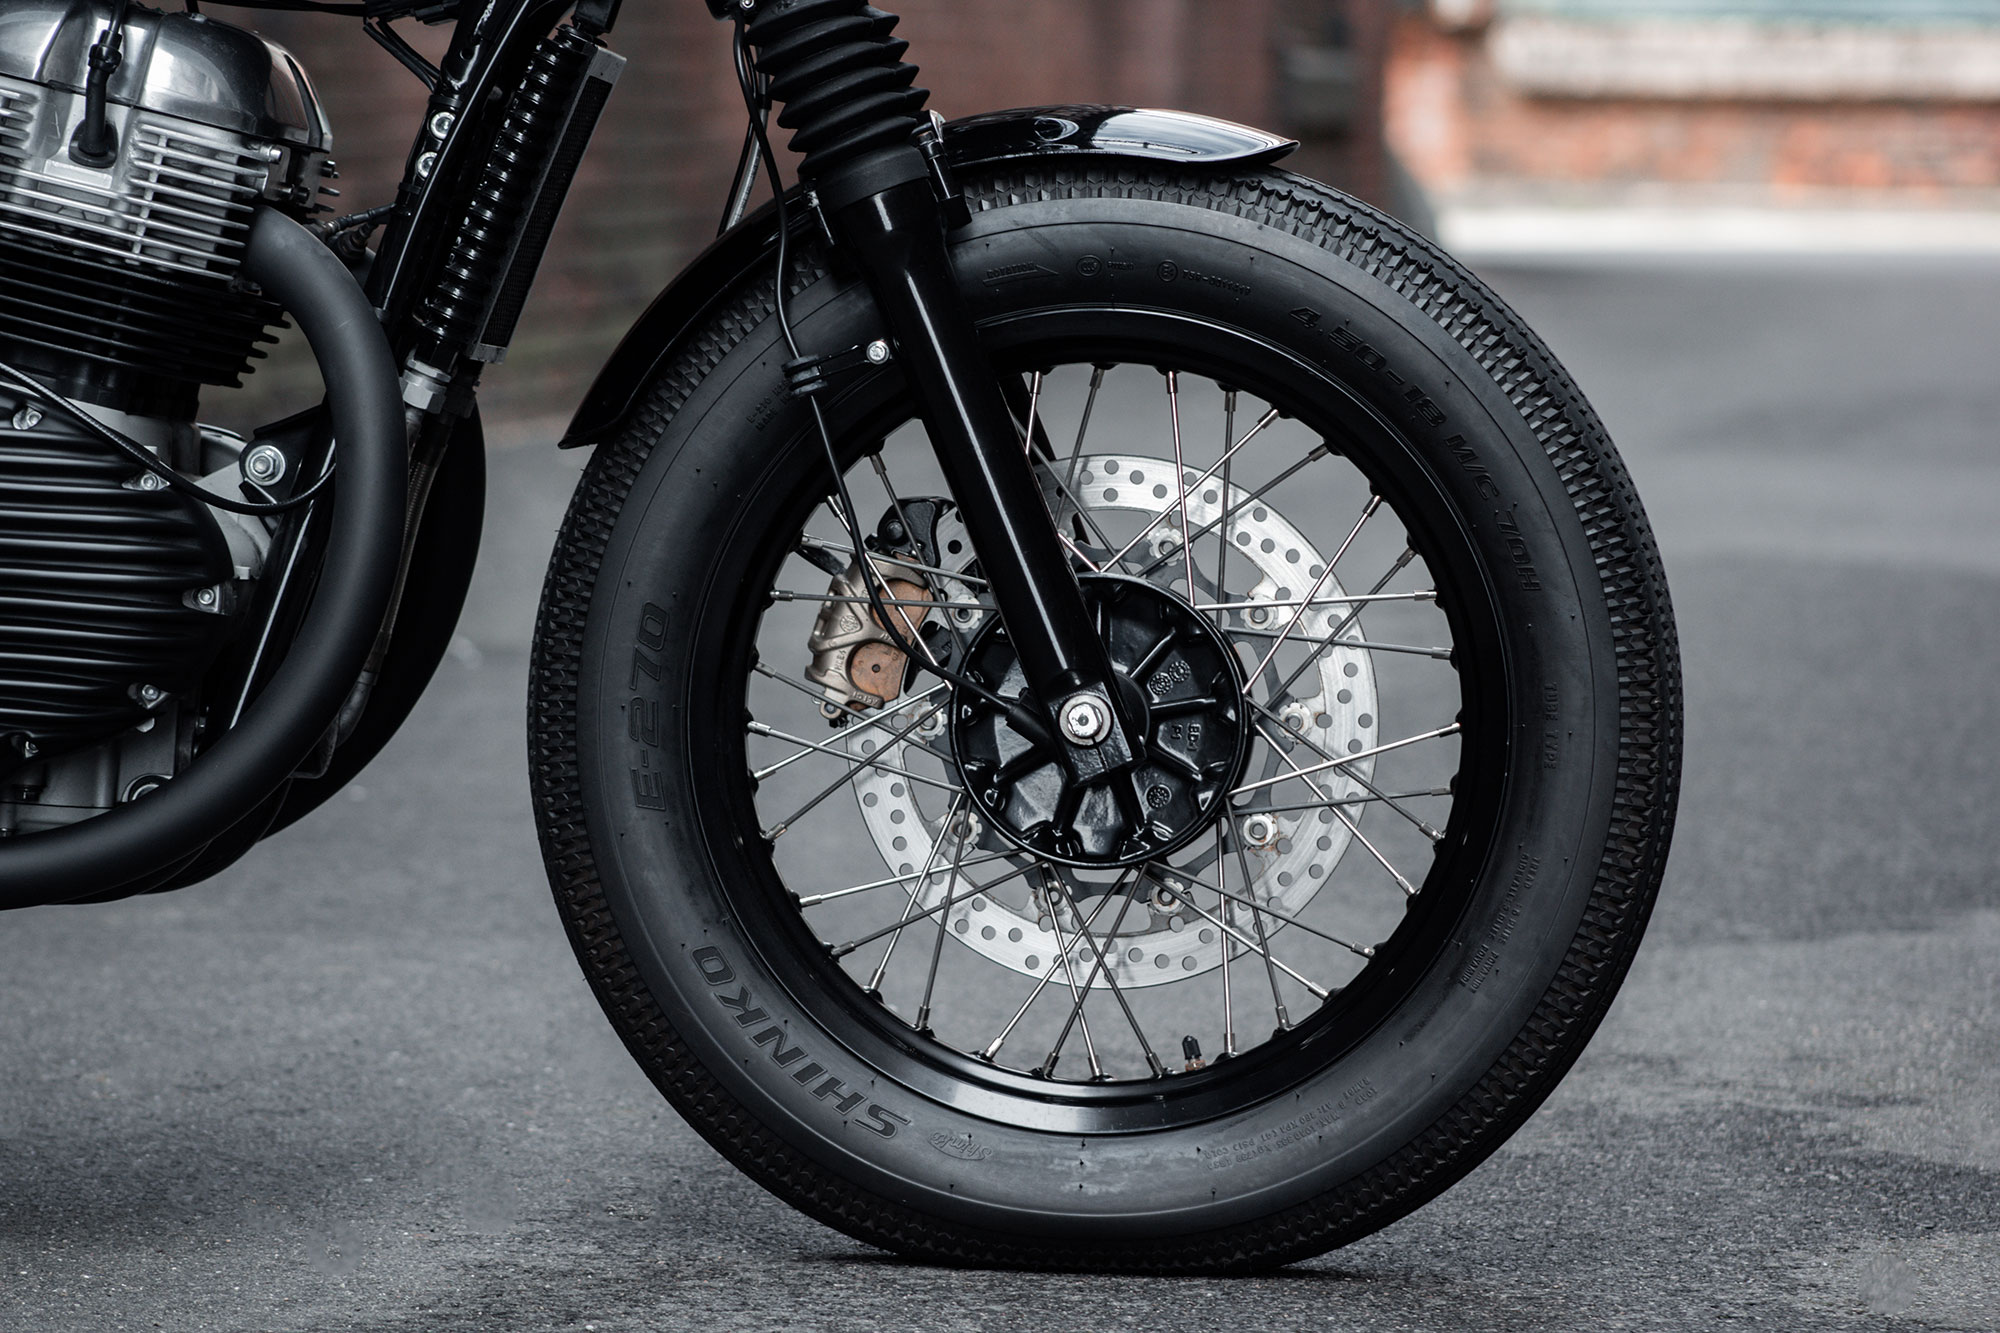 Imperfecta: The Cafe Racer Redefining Motorcycle Aesthetics - Gessato